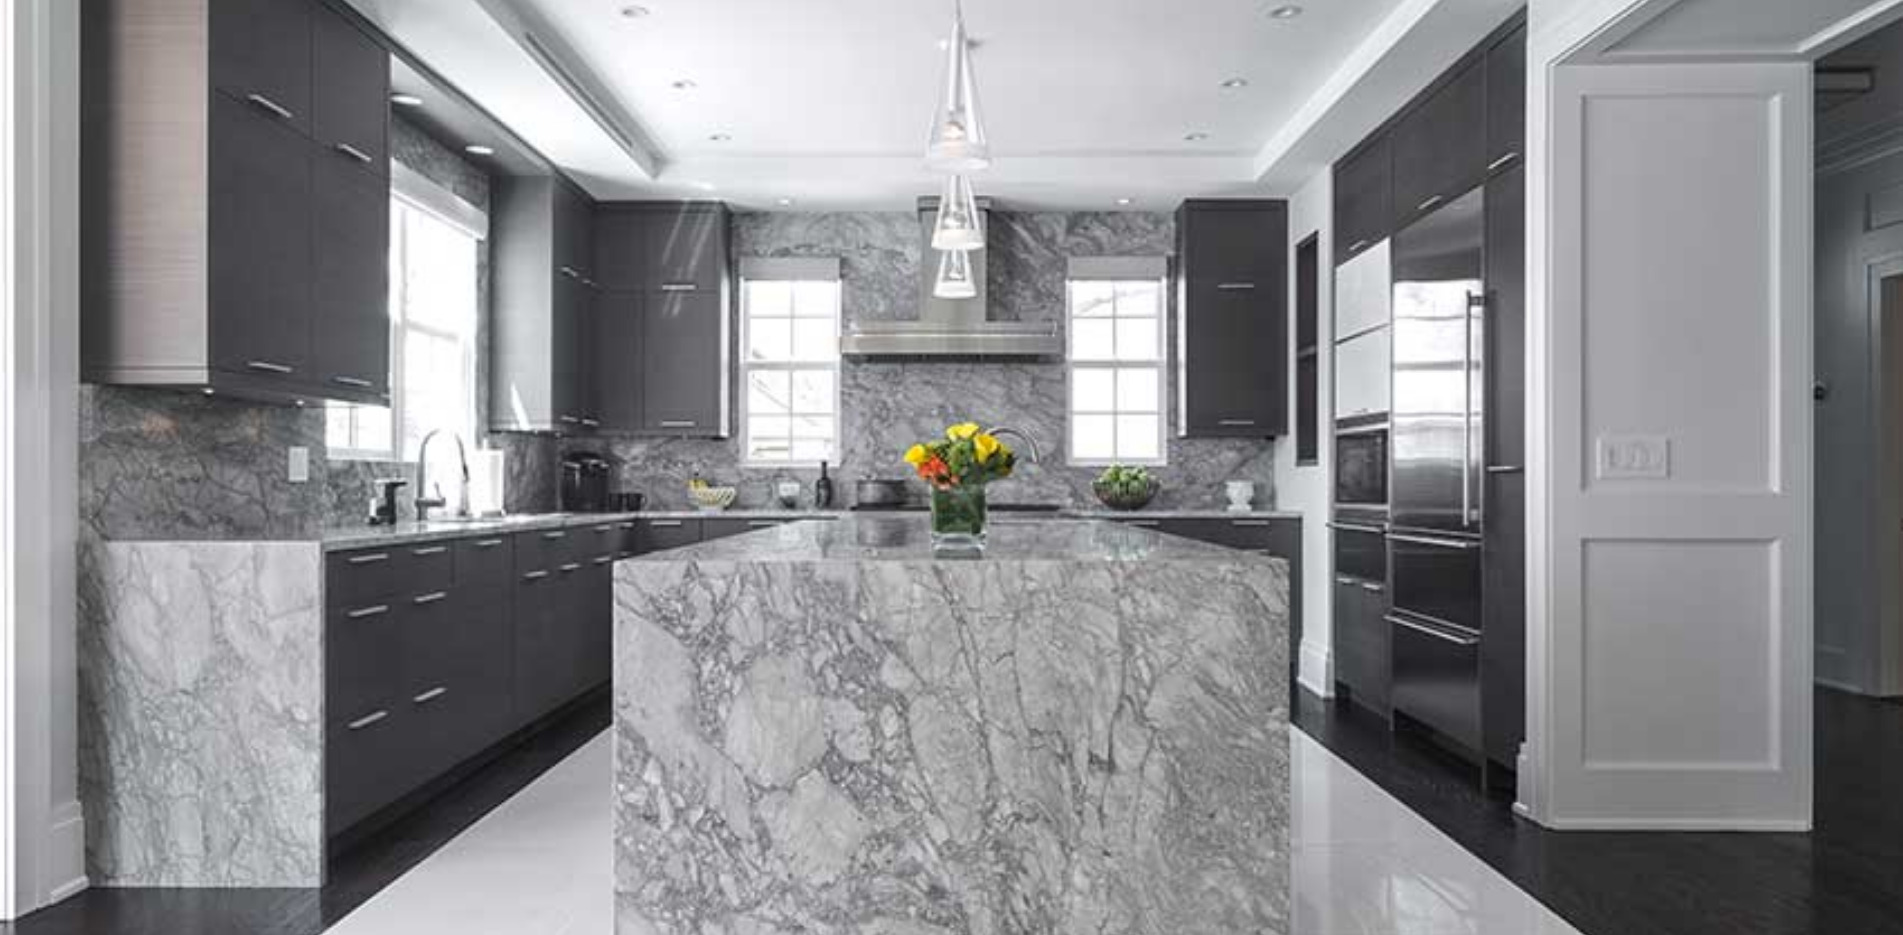  - 6 Ways Marble Is Used In Modern Interior Design